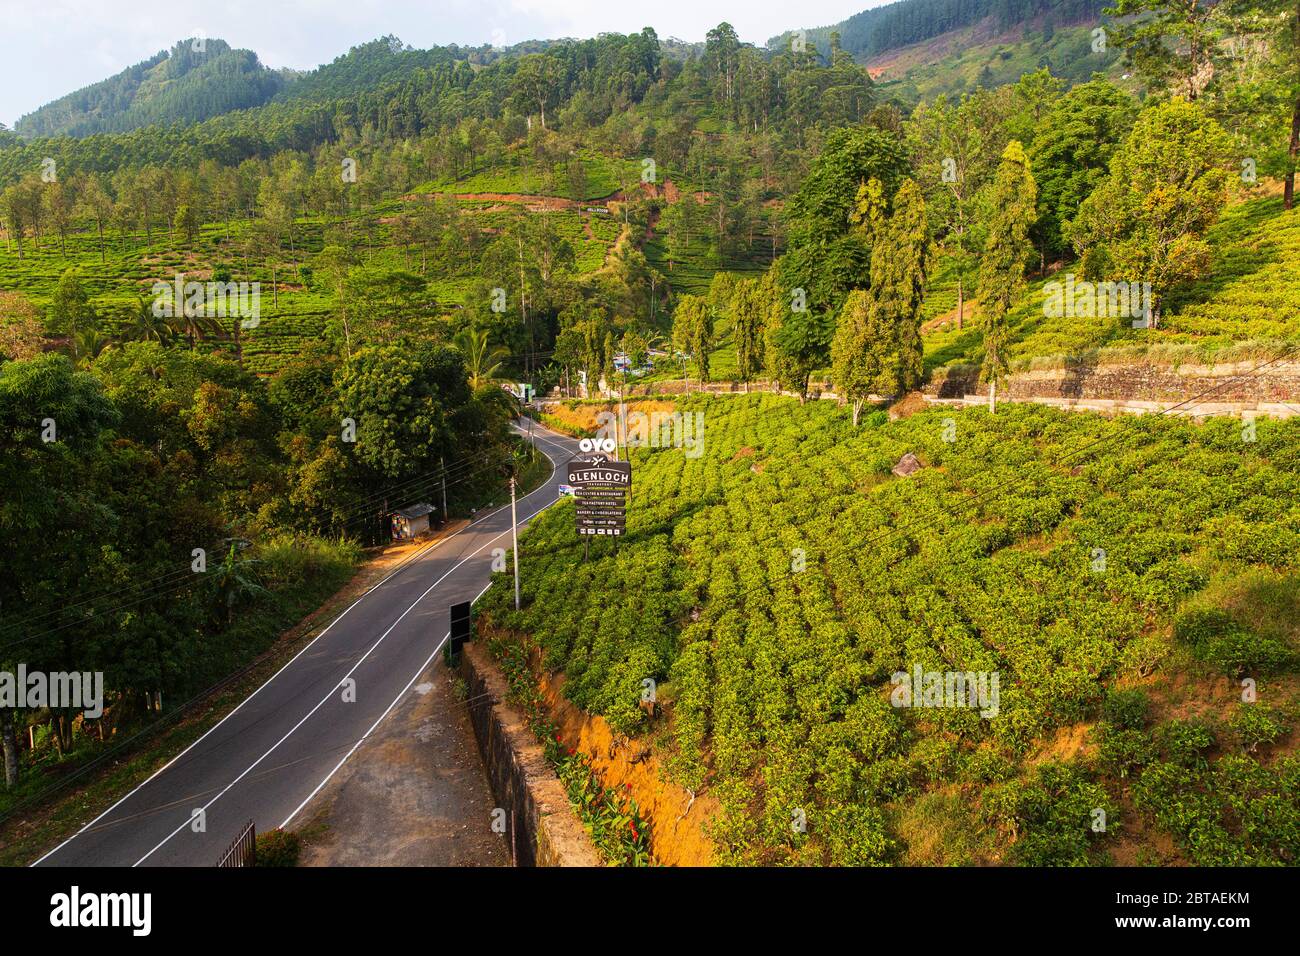 Tea production in Sri Lanka.  Introduced by the British after coffee failed.  Now back mainly in private hands. Stock Photo